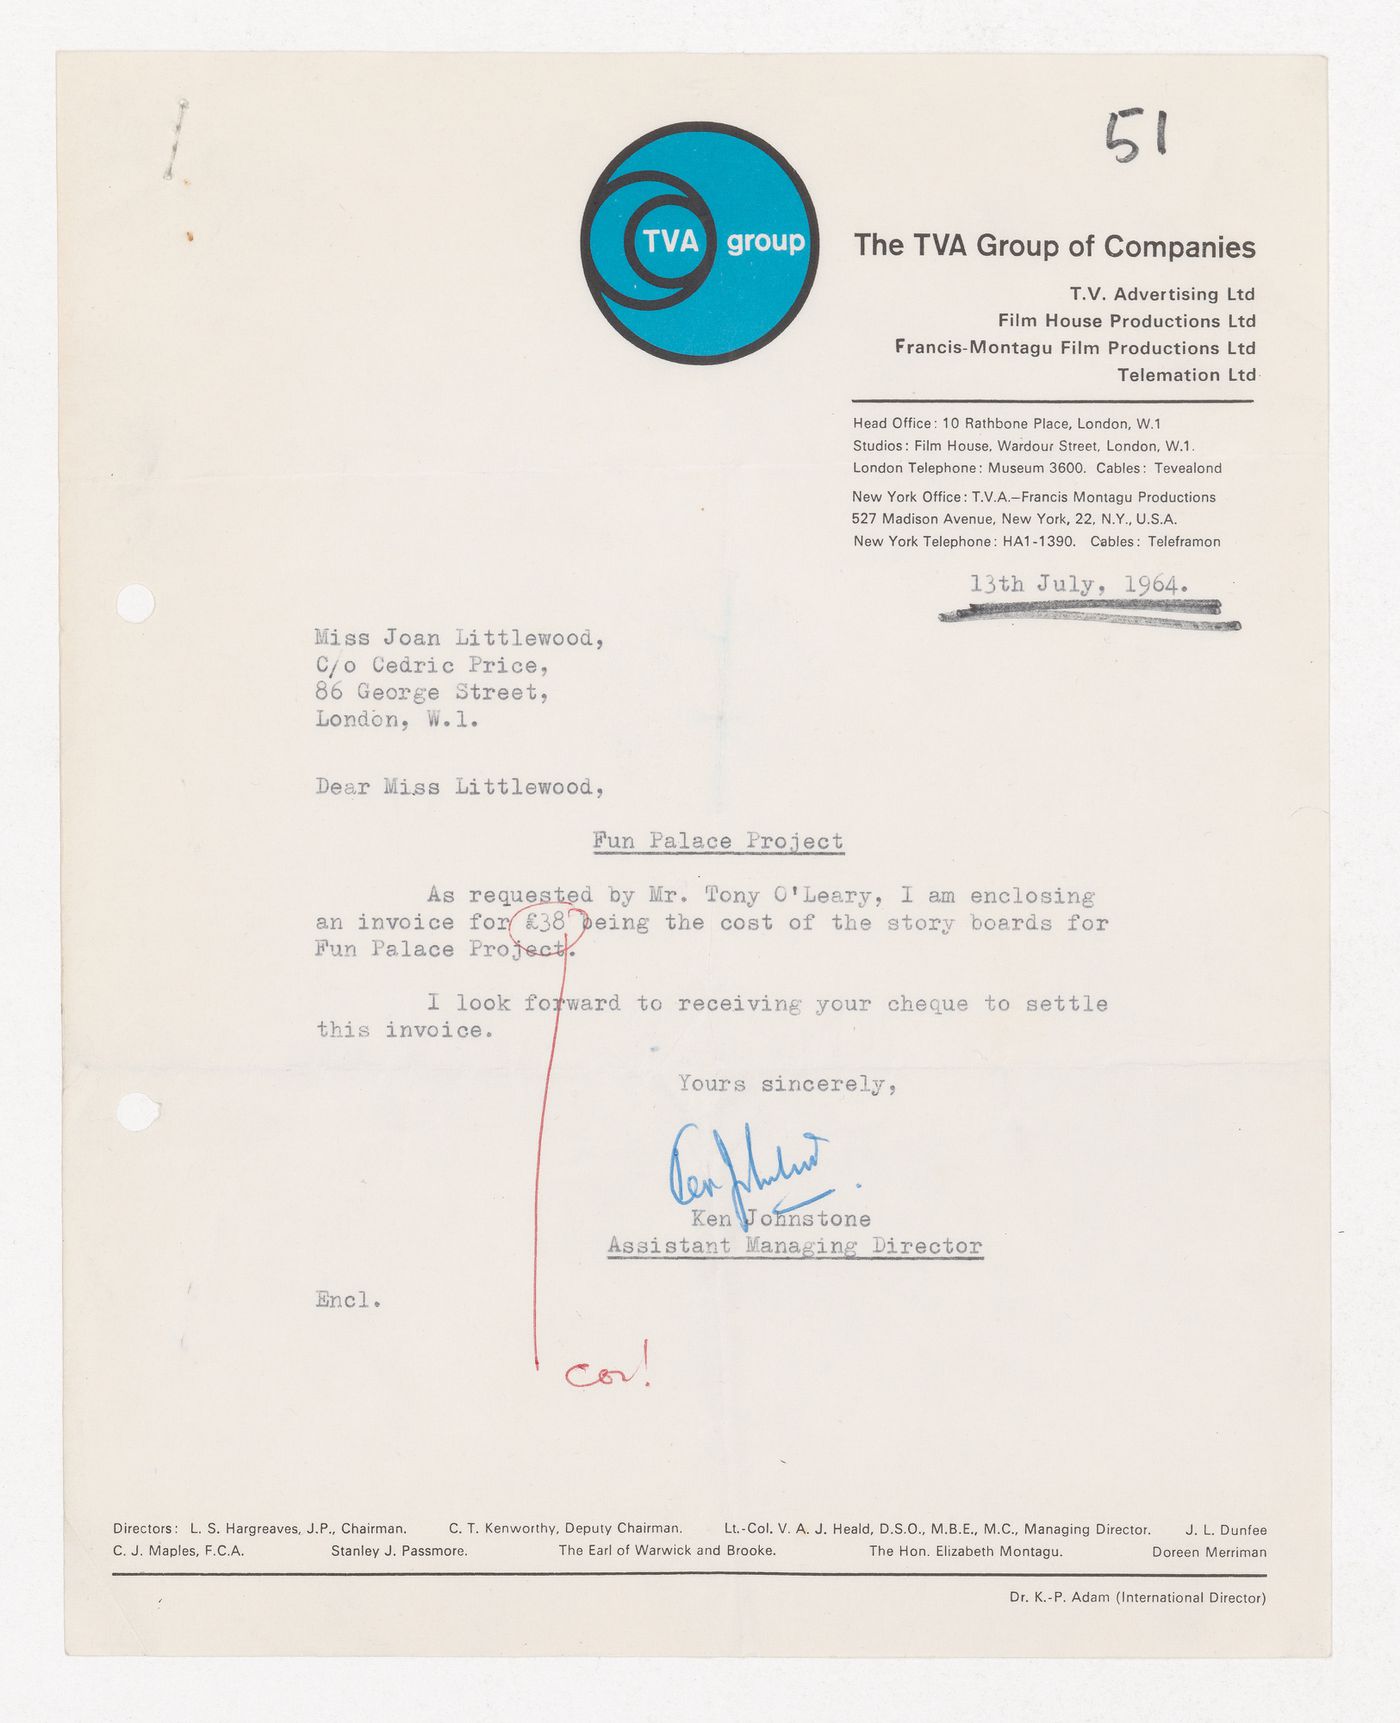 Letter from Ken Johnstone of The TVA Group of Companies to Joan Littlewood regarding payment for storyboards for Fun Palace Project film, with accompanying invoice